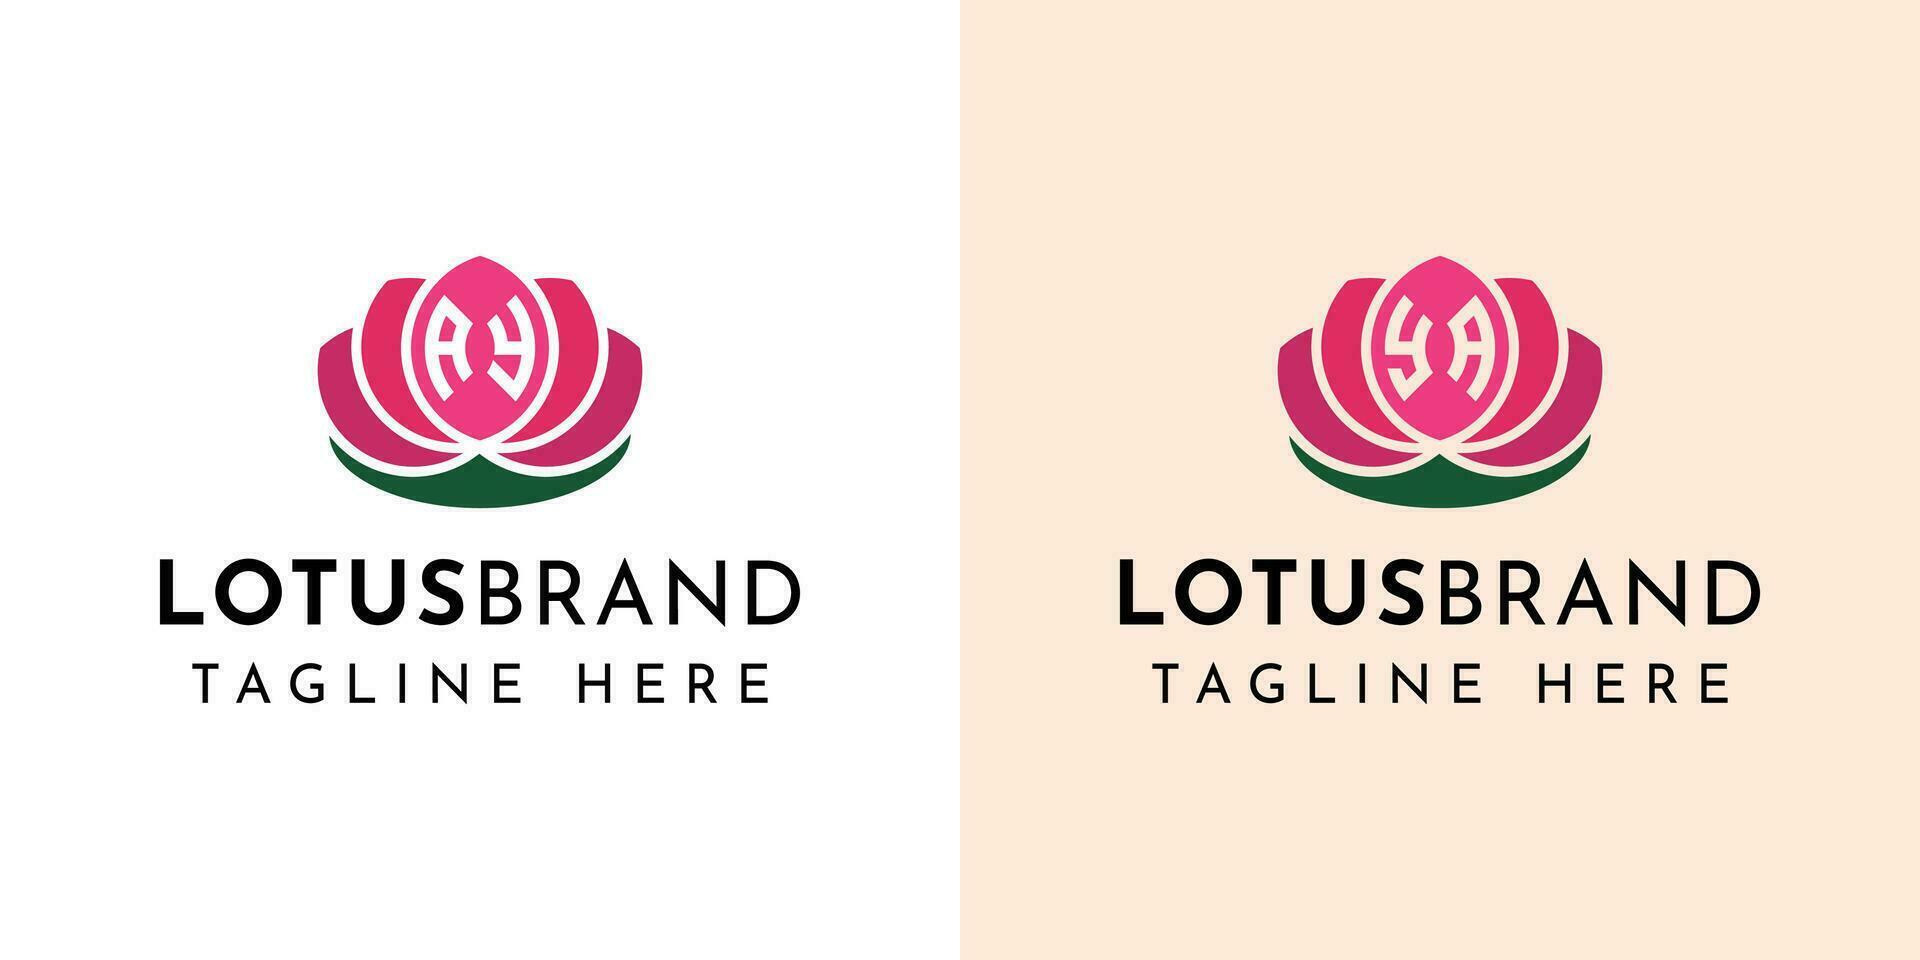 Letter AY and YA Lotus Logo Set, suitable for any business related to lotus flowers with AY or YA initials. vector